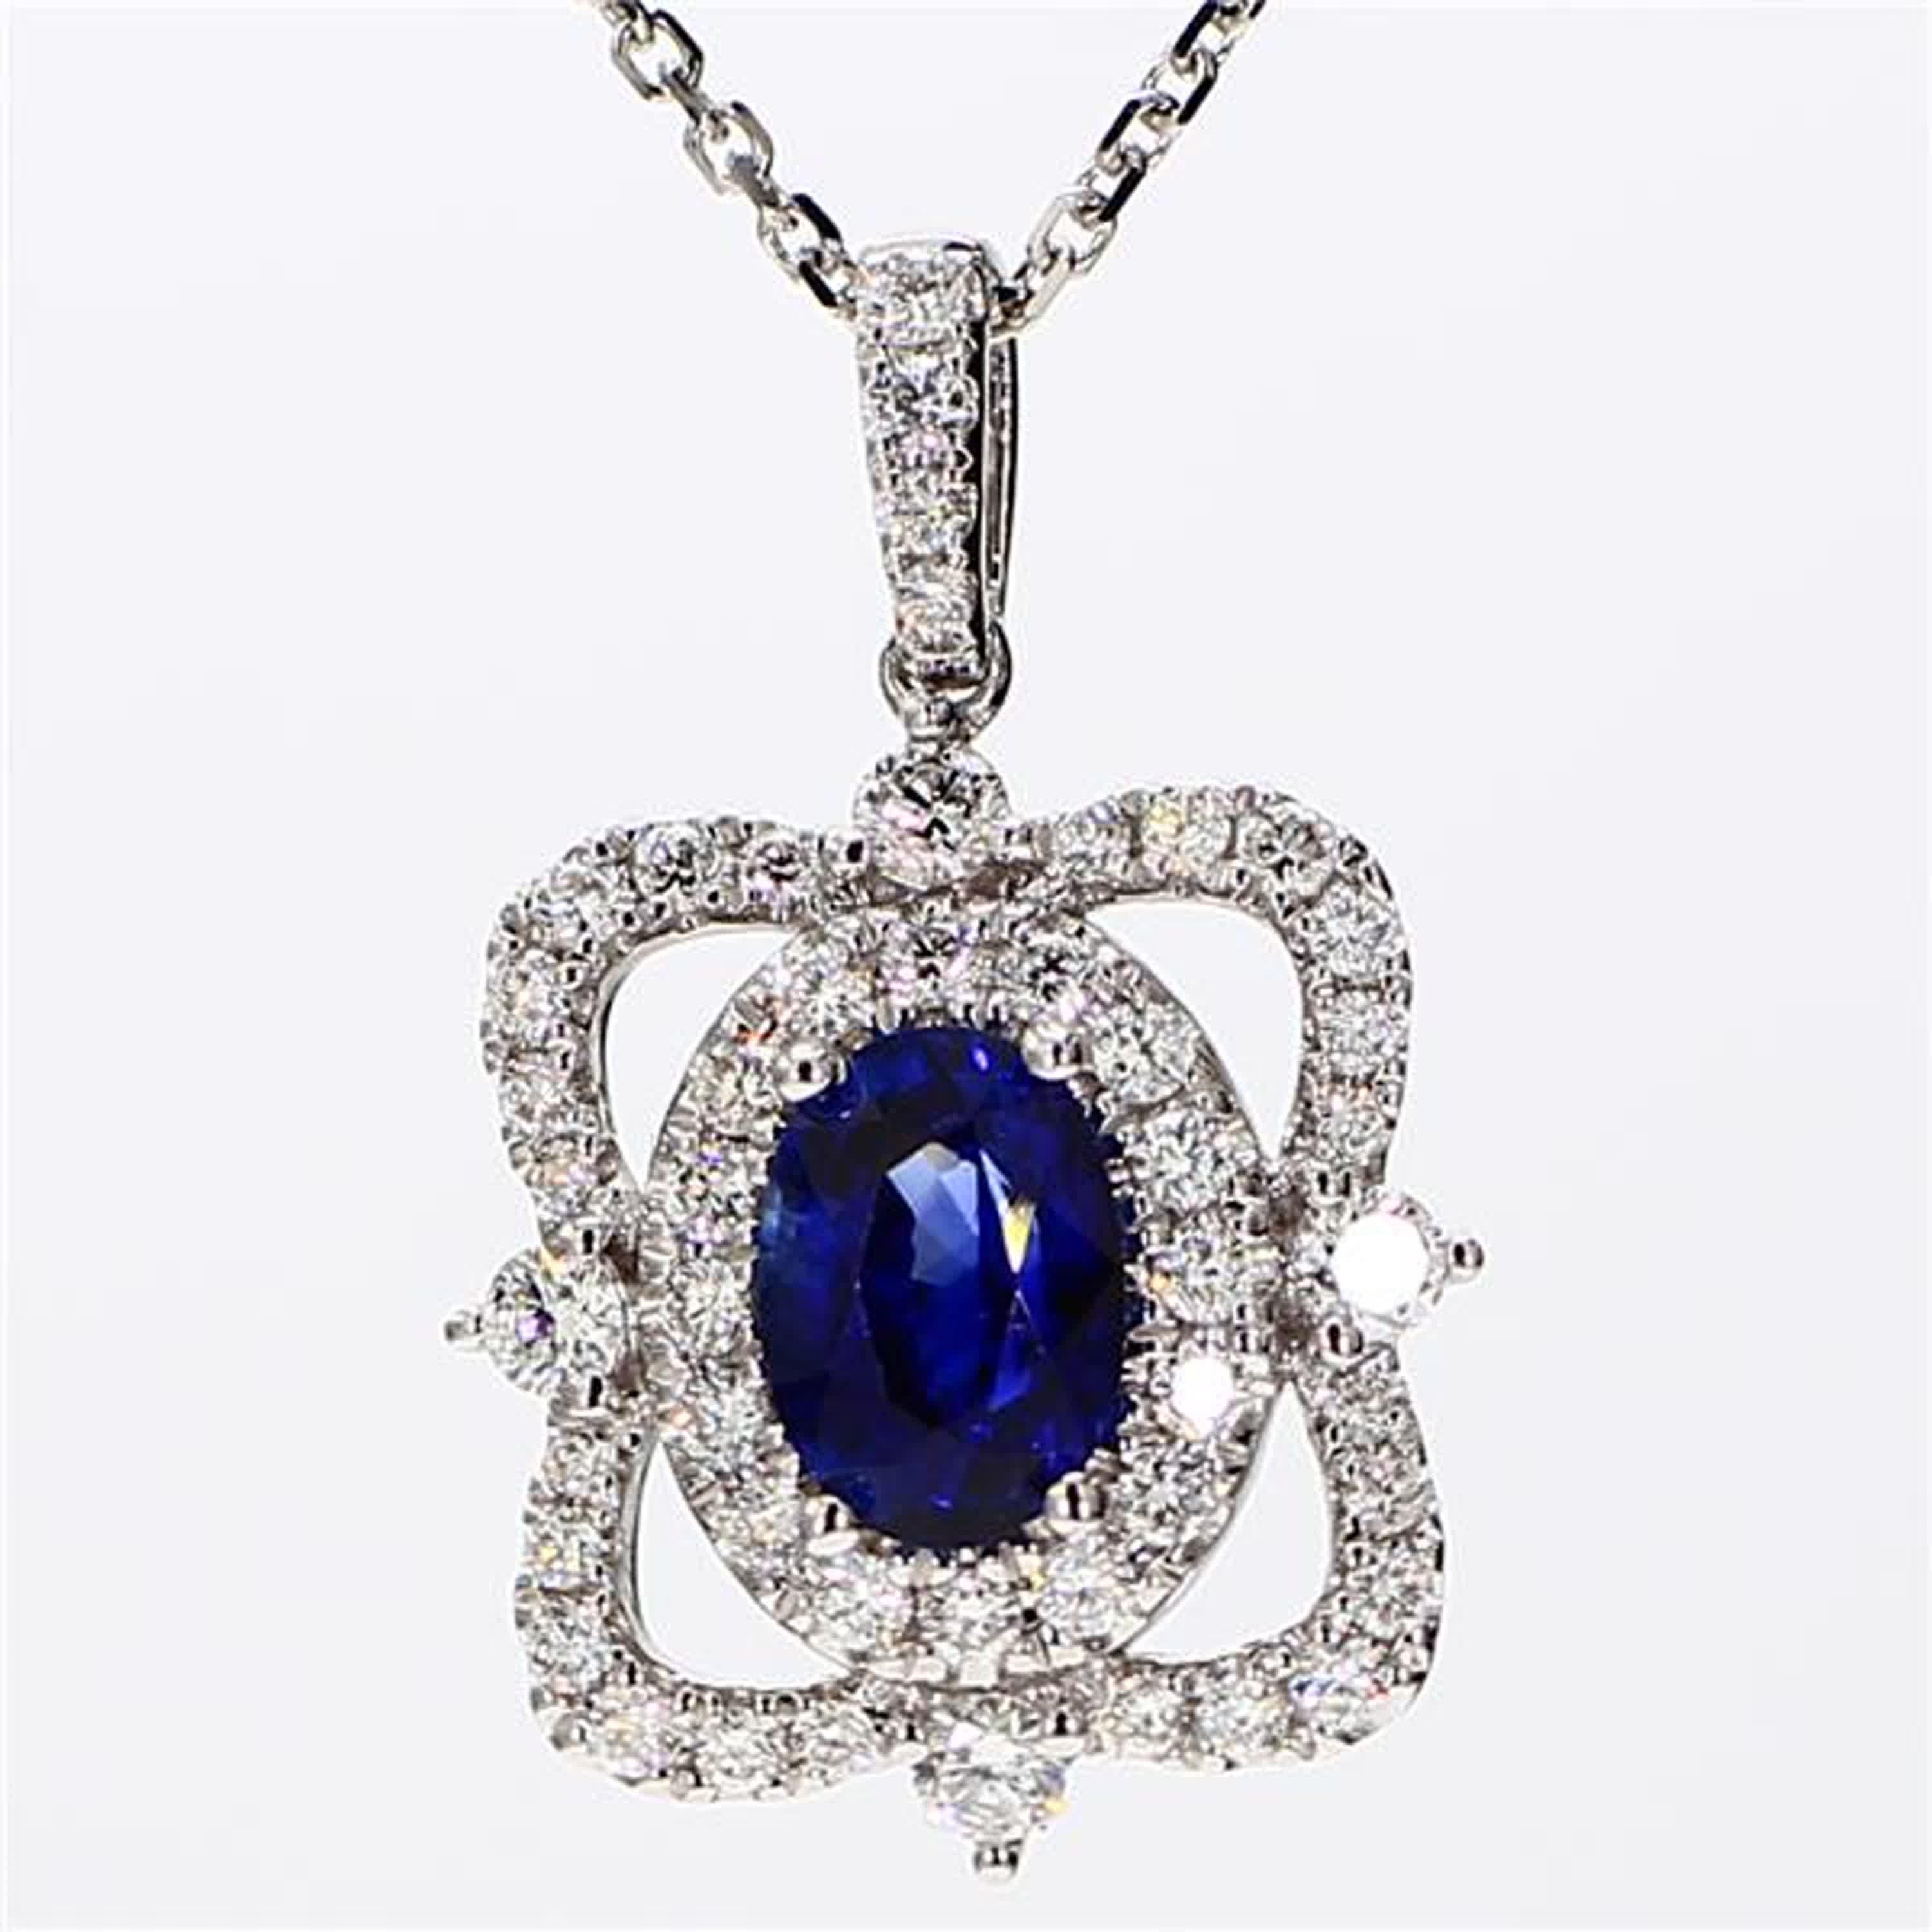 RareGemWorld's classic sapphire pendant. Mounted in a beautiful 18K White Gold setting with a natural oval cut blue sapphire. The sapphire is surrounded by natural round white diamond melee. This pendant is guaranteed to impress and enhance your